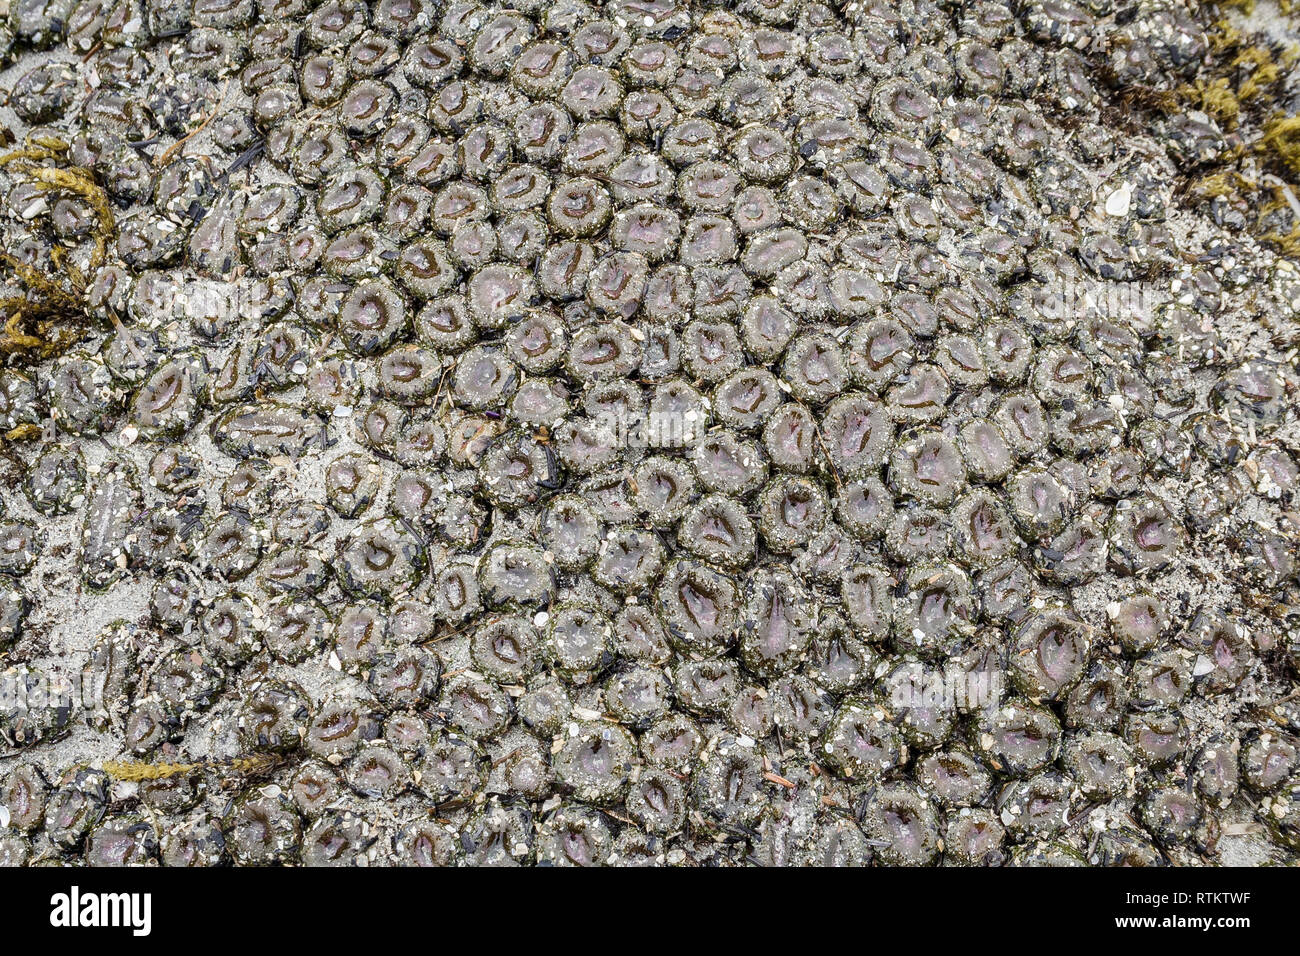 The frame is filled with a colony of closed Aggregating anemones, exposed at low tide on a remote beach on British Columbia's Central Coast. Stock Photo